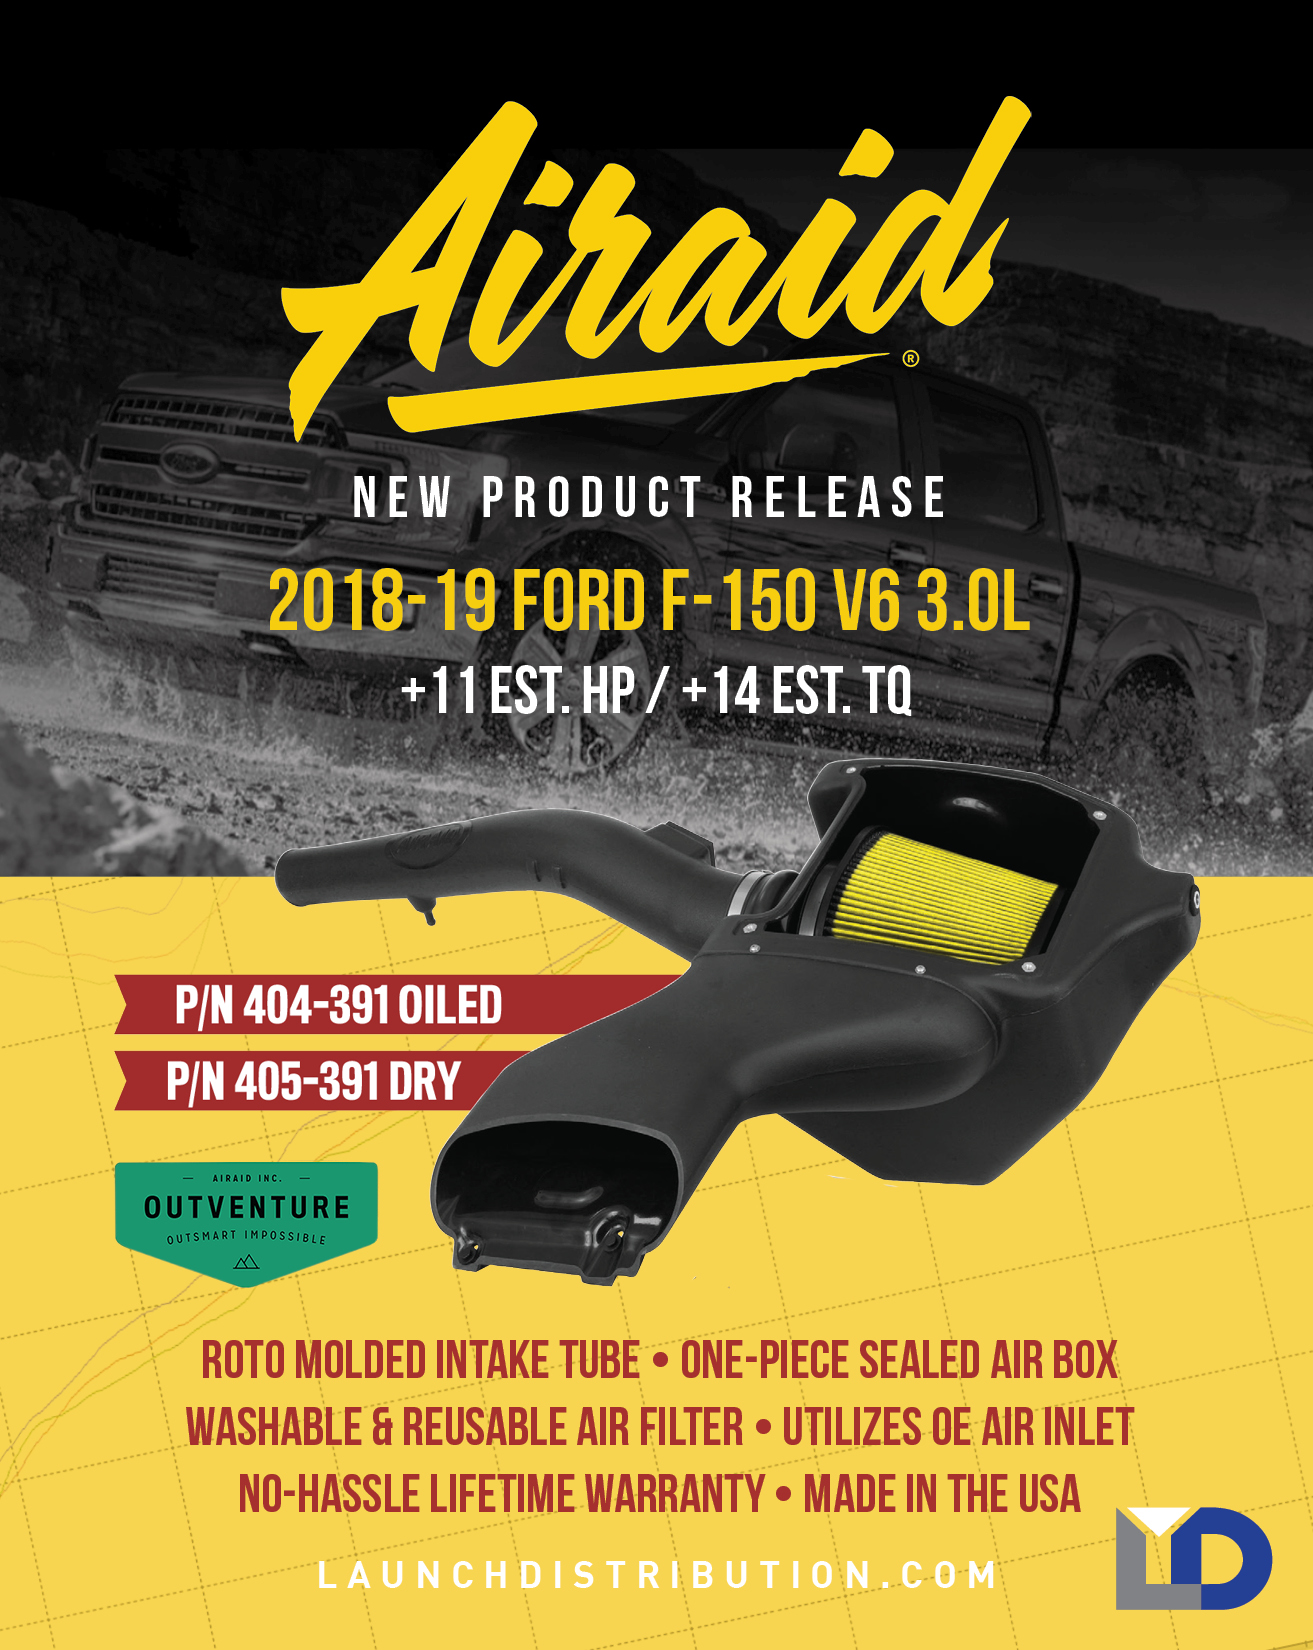 NEW PRODUCT 2018-2019 Ford F150 V6 3.0L Intake Kit from AIRAID